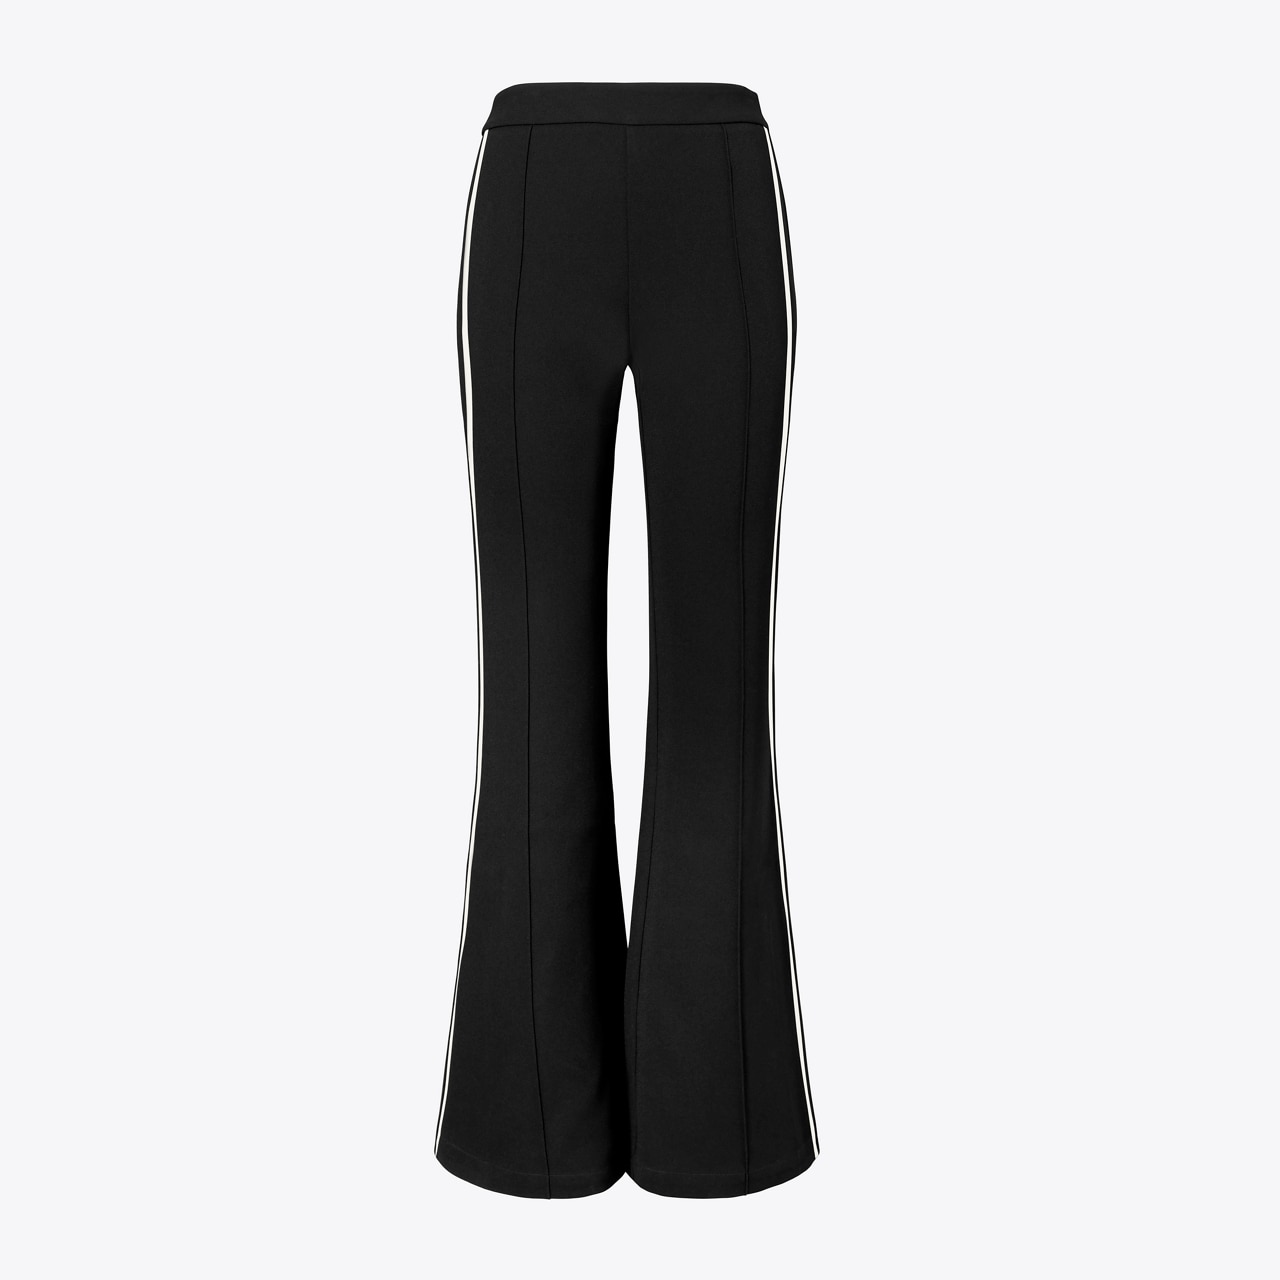 https://s7.toryburch.com/is/image/ToryBurch/style/side-striped-flared-pant-front.TB_151702_001_SLFRO.pdp-1280x1280.jpg